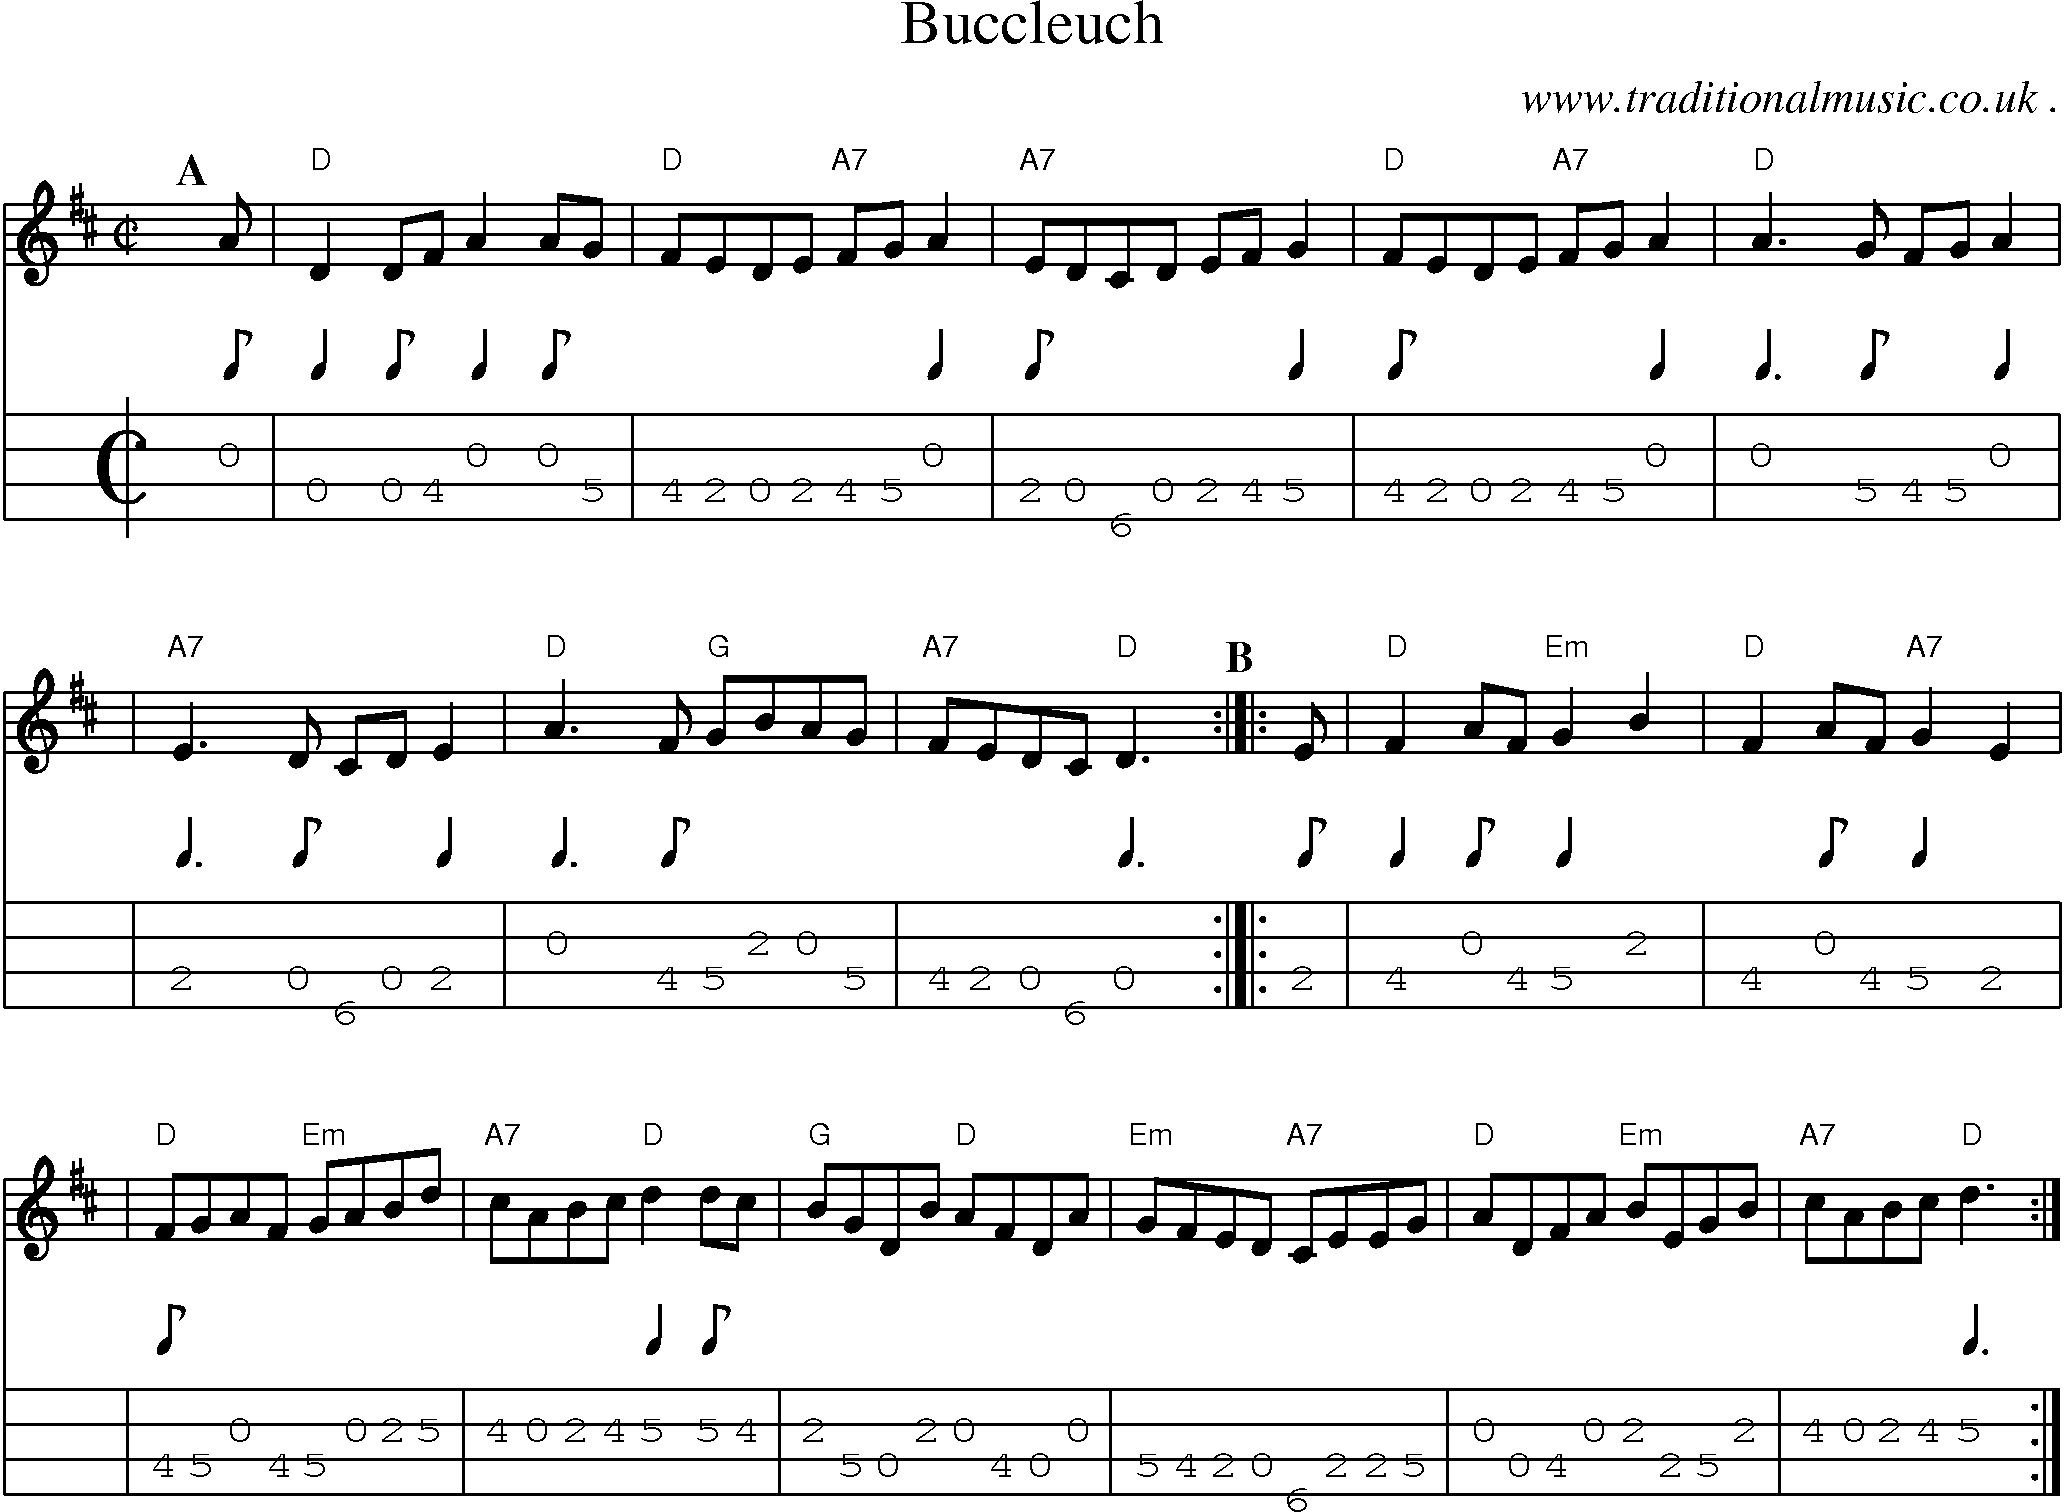 Sheet-music  score, Chords and Mandolin Tabs for Buccleuch